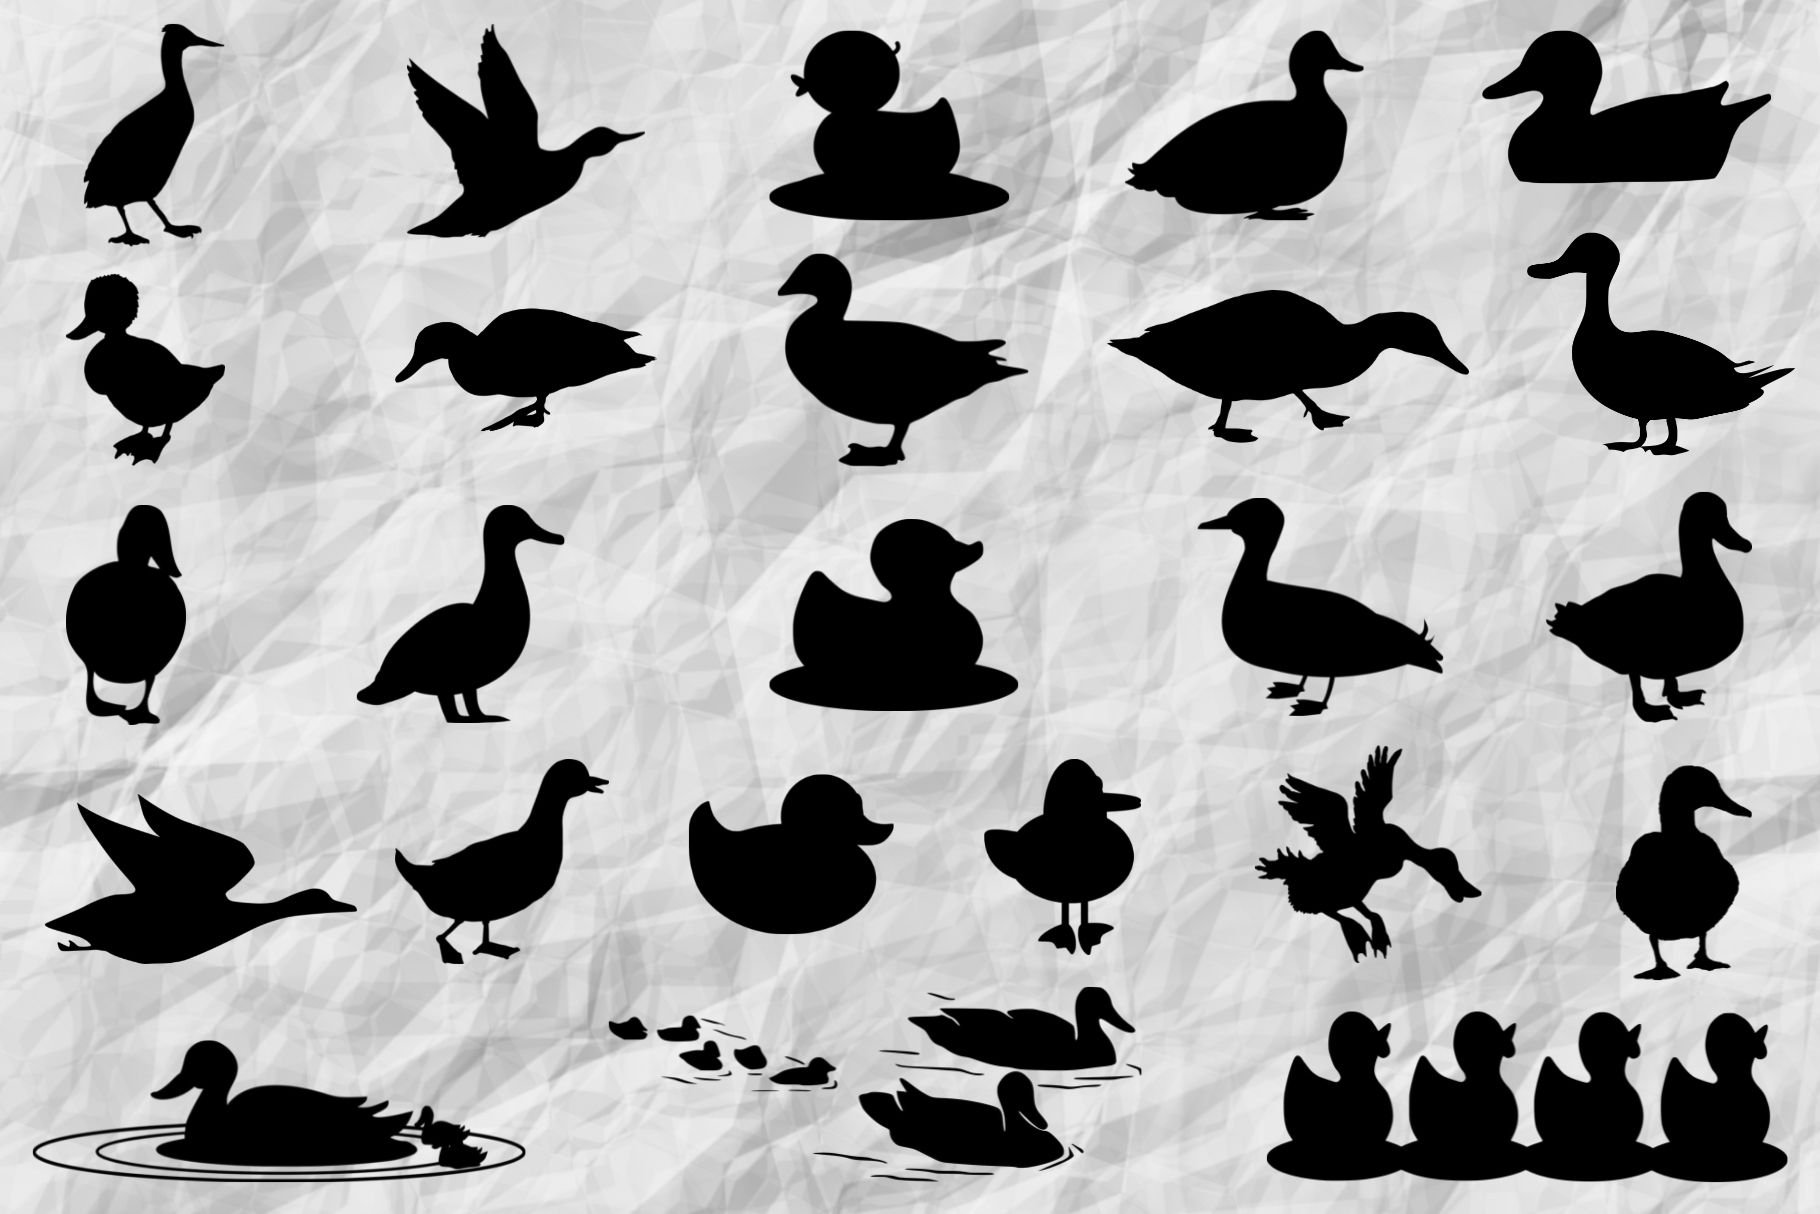 Duck Silhouette cover image.